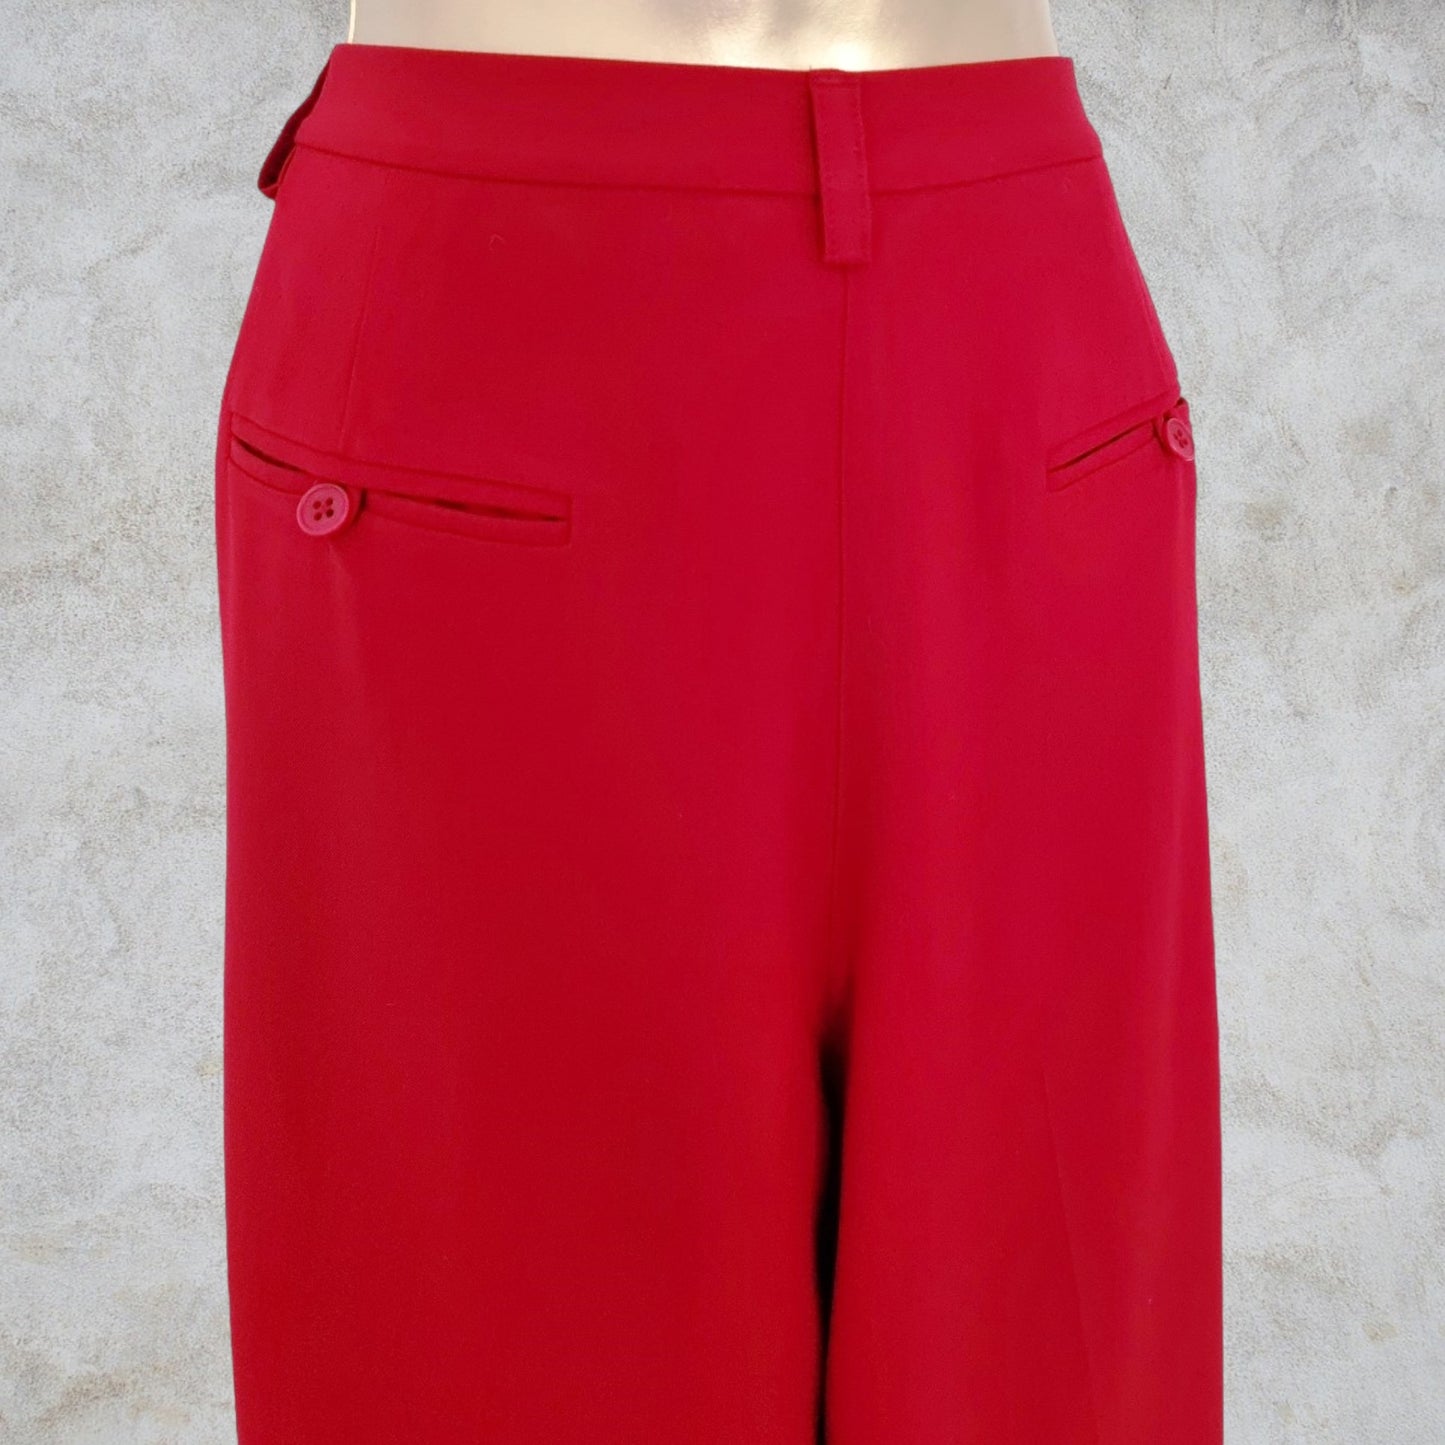 Ralph Lauren Red Vintage Trousers UK 12 US 8 EU 40 Timeless Fashions